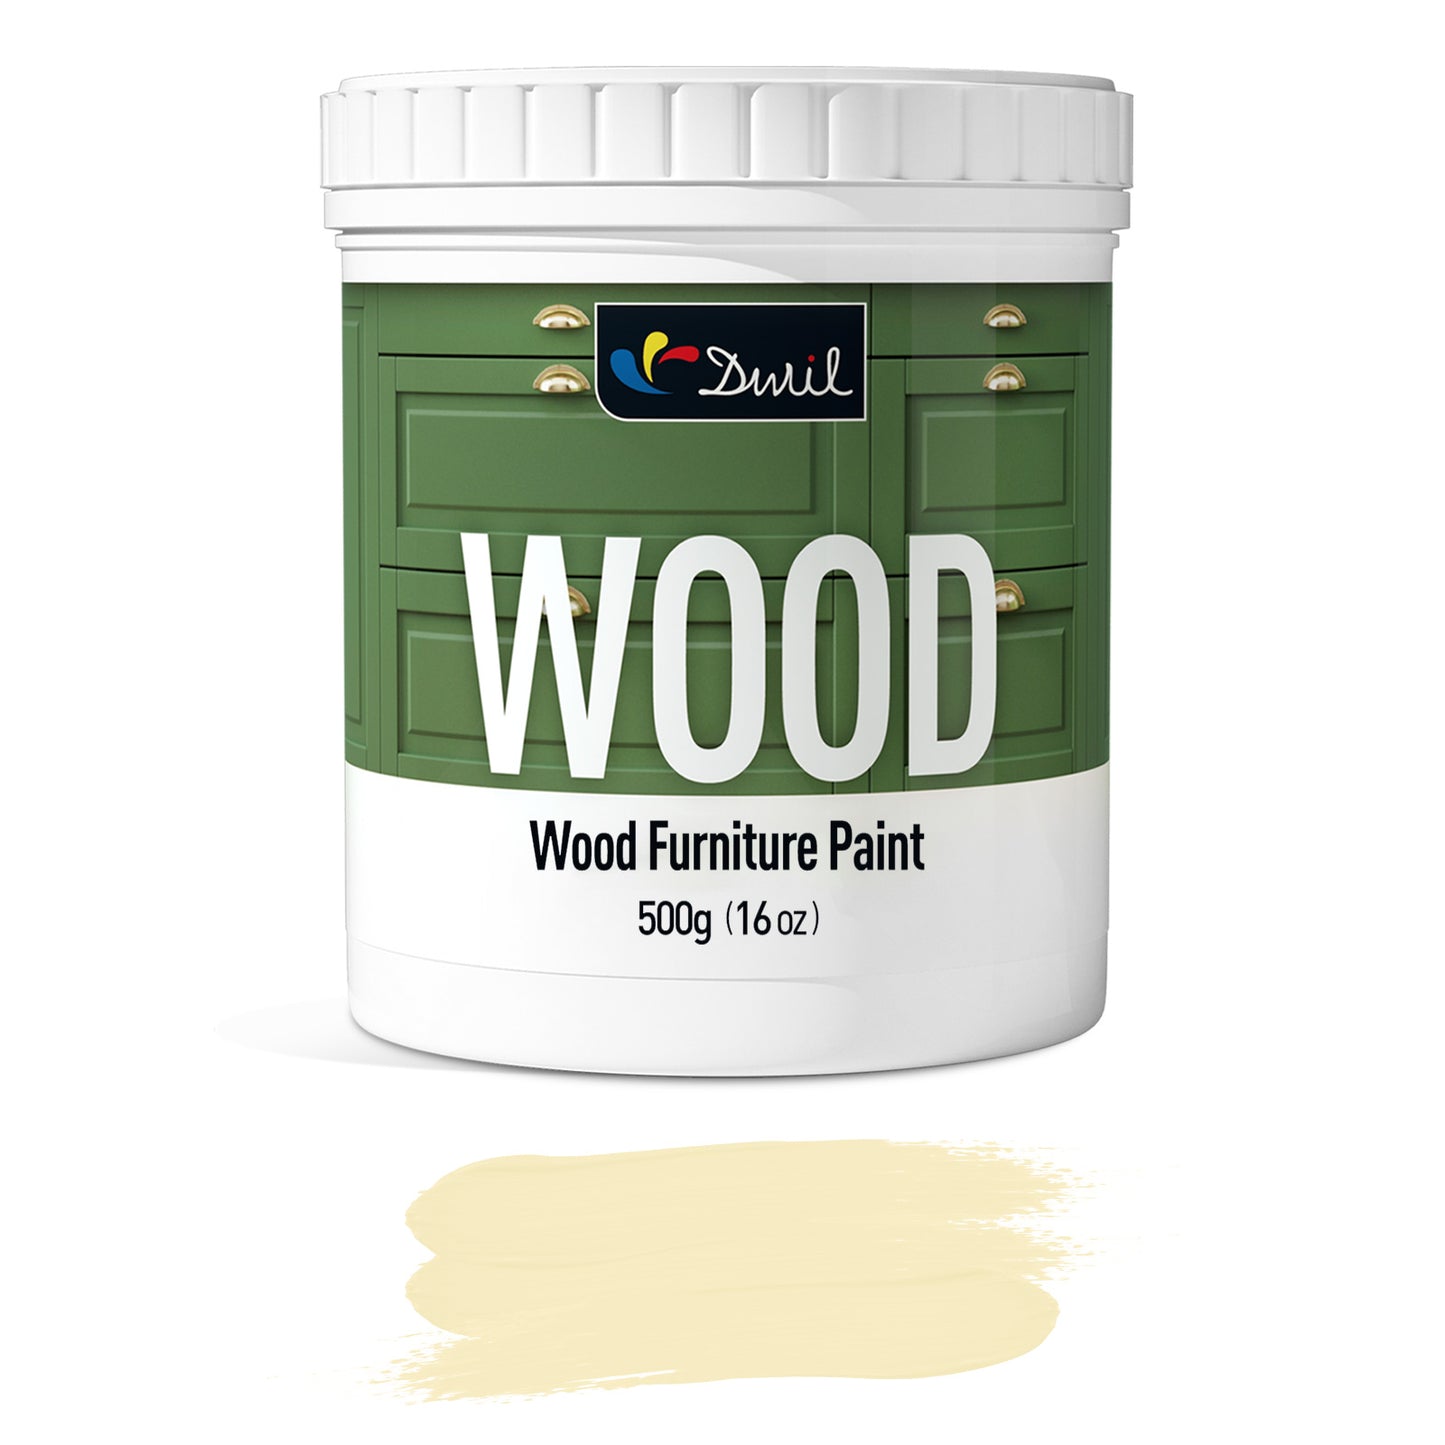 DWIL Wood Furniture Paint Kit (With Tools)